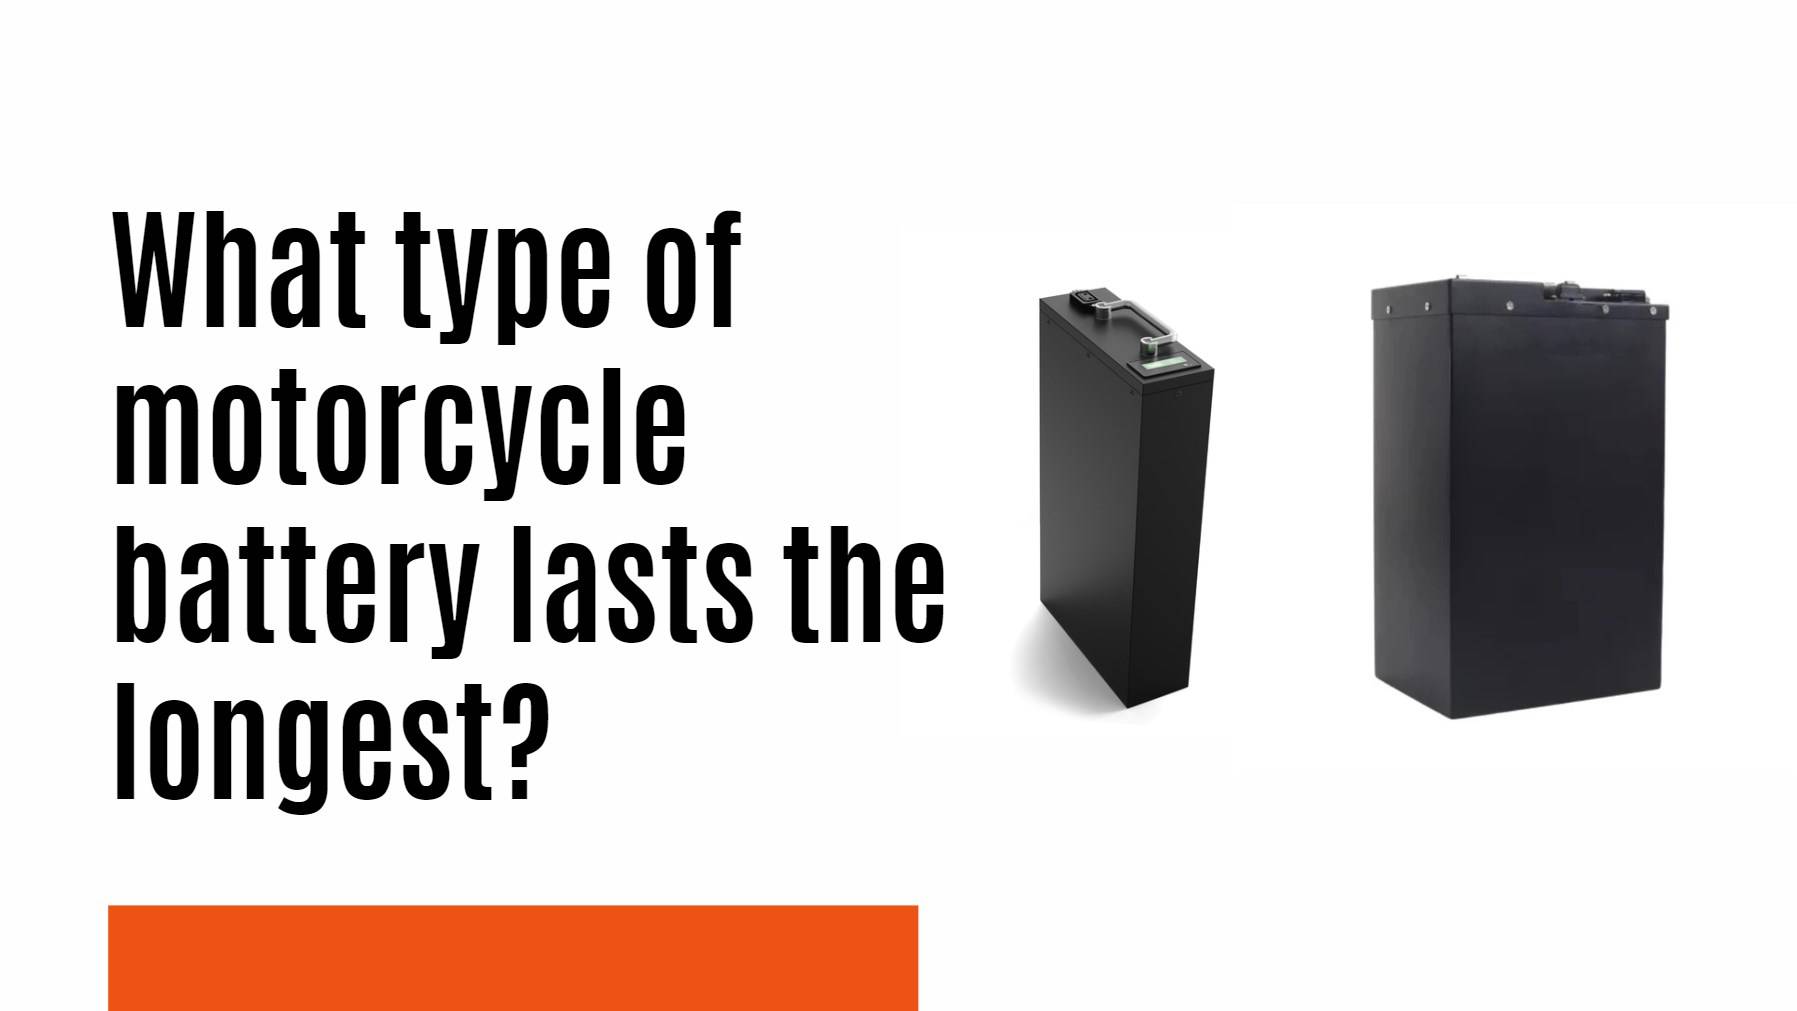 electric motorcycle lithium battery factory manufacturer. What type of motorcycle battery lasts the longest?